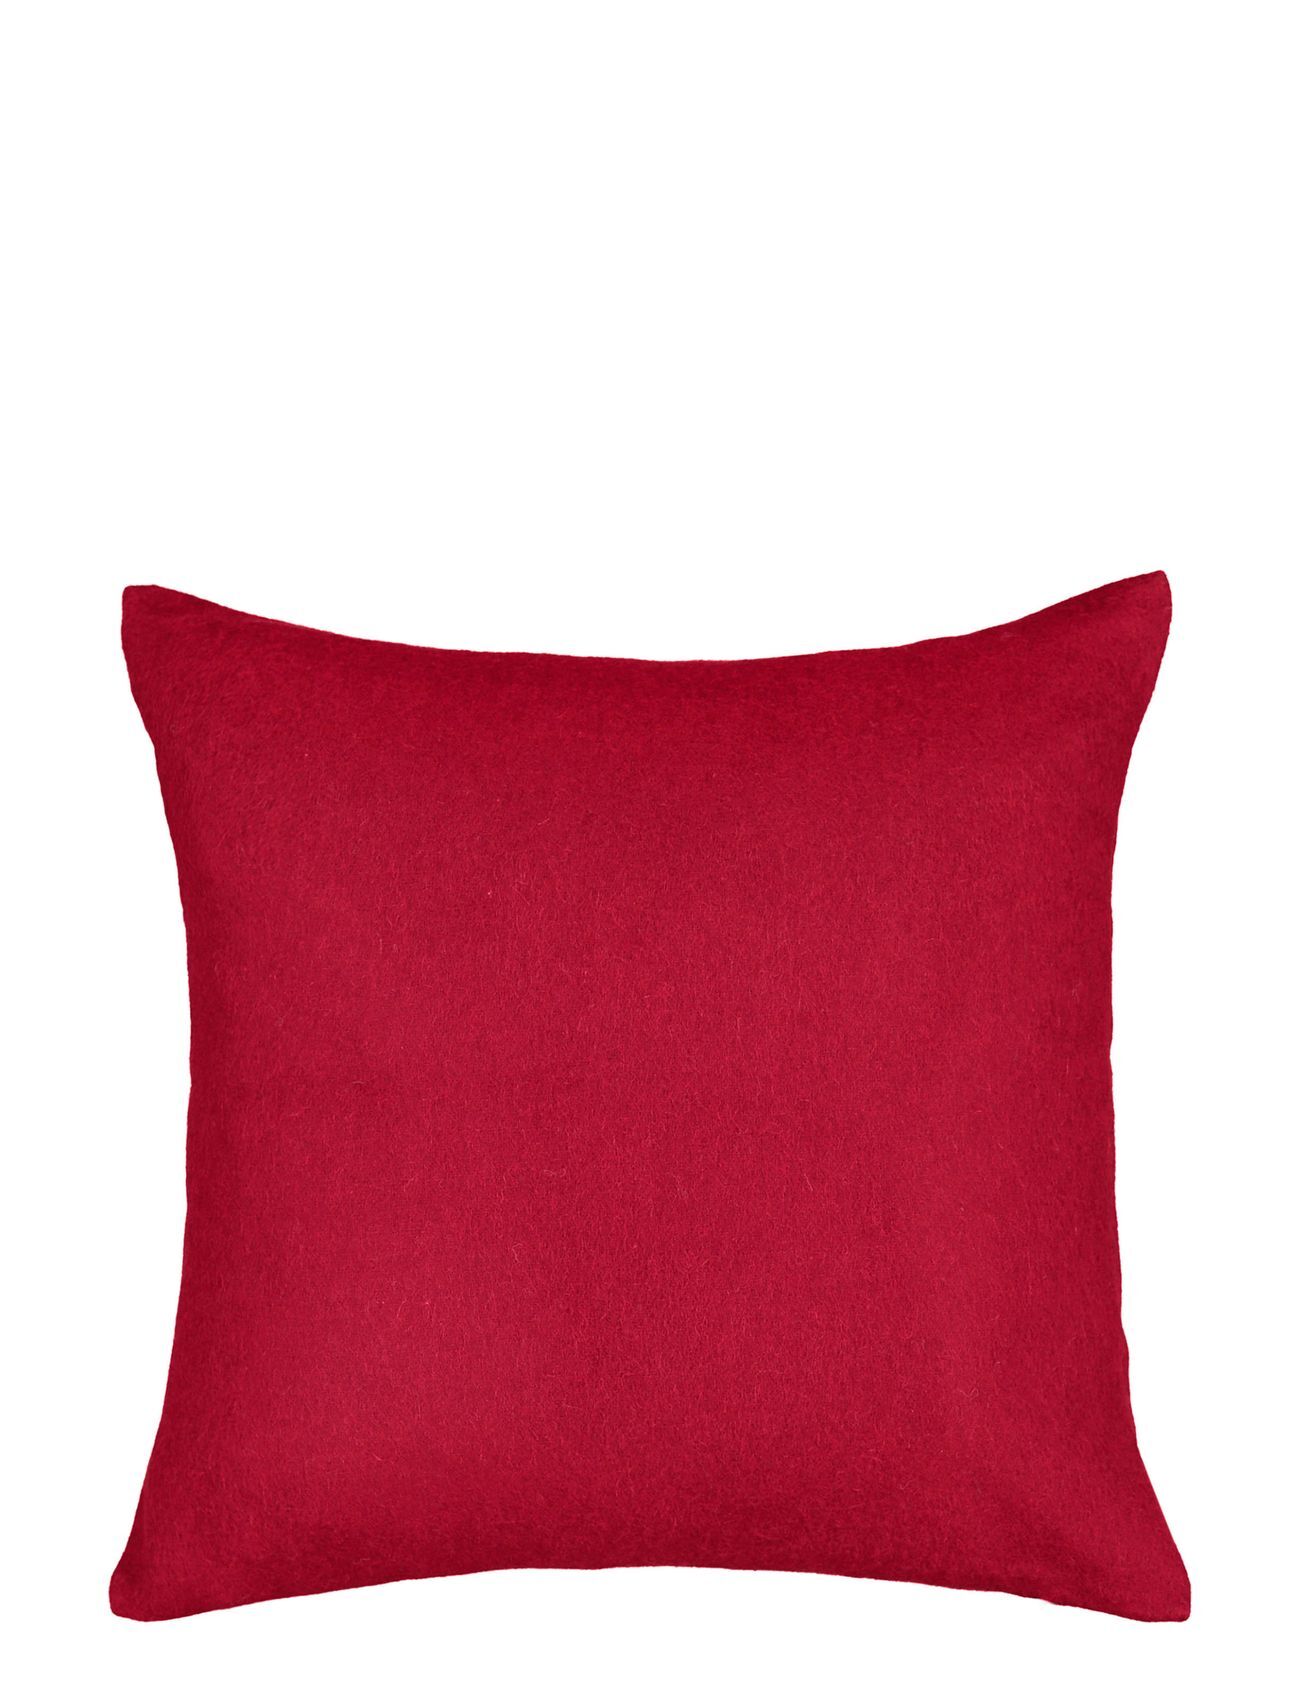 Elvang Classic Cushion Cover Home Textiles Cushions & Blankets Cushion Covers Rød Elvang